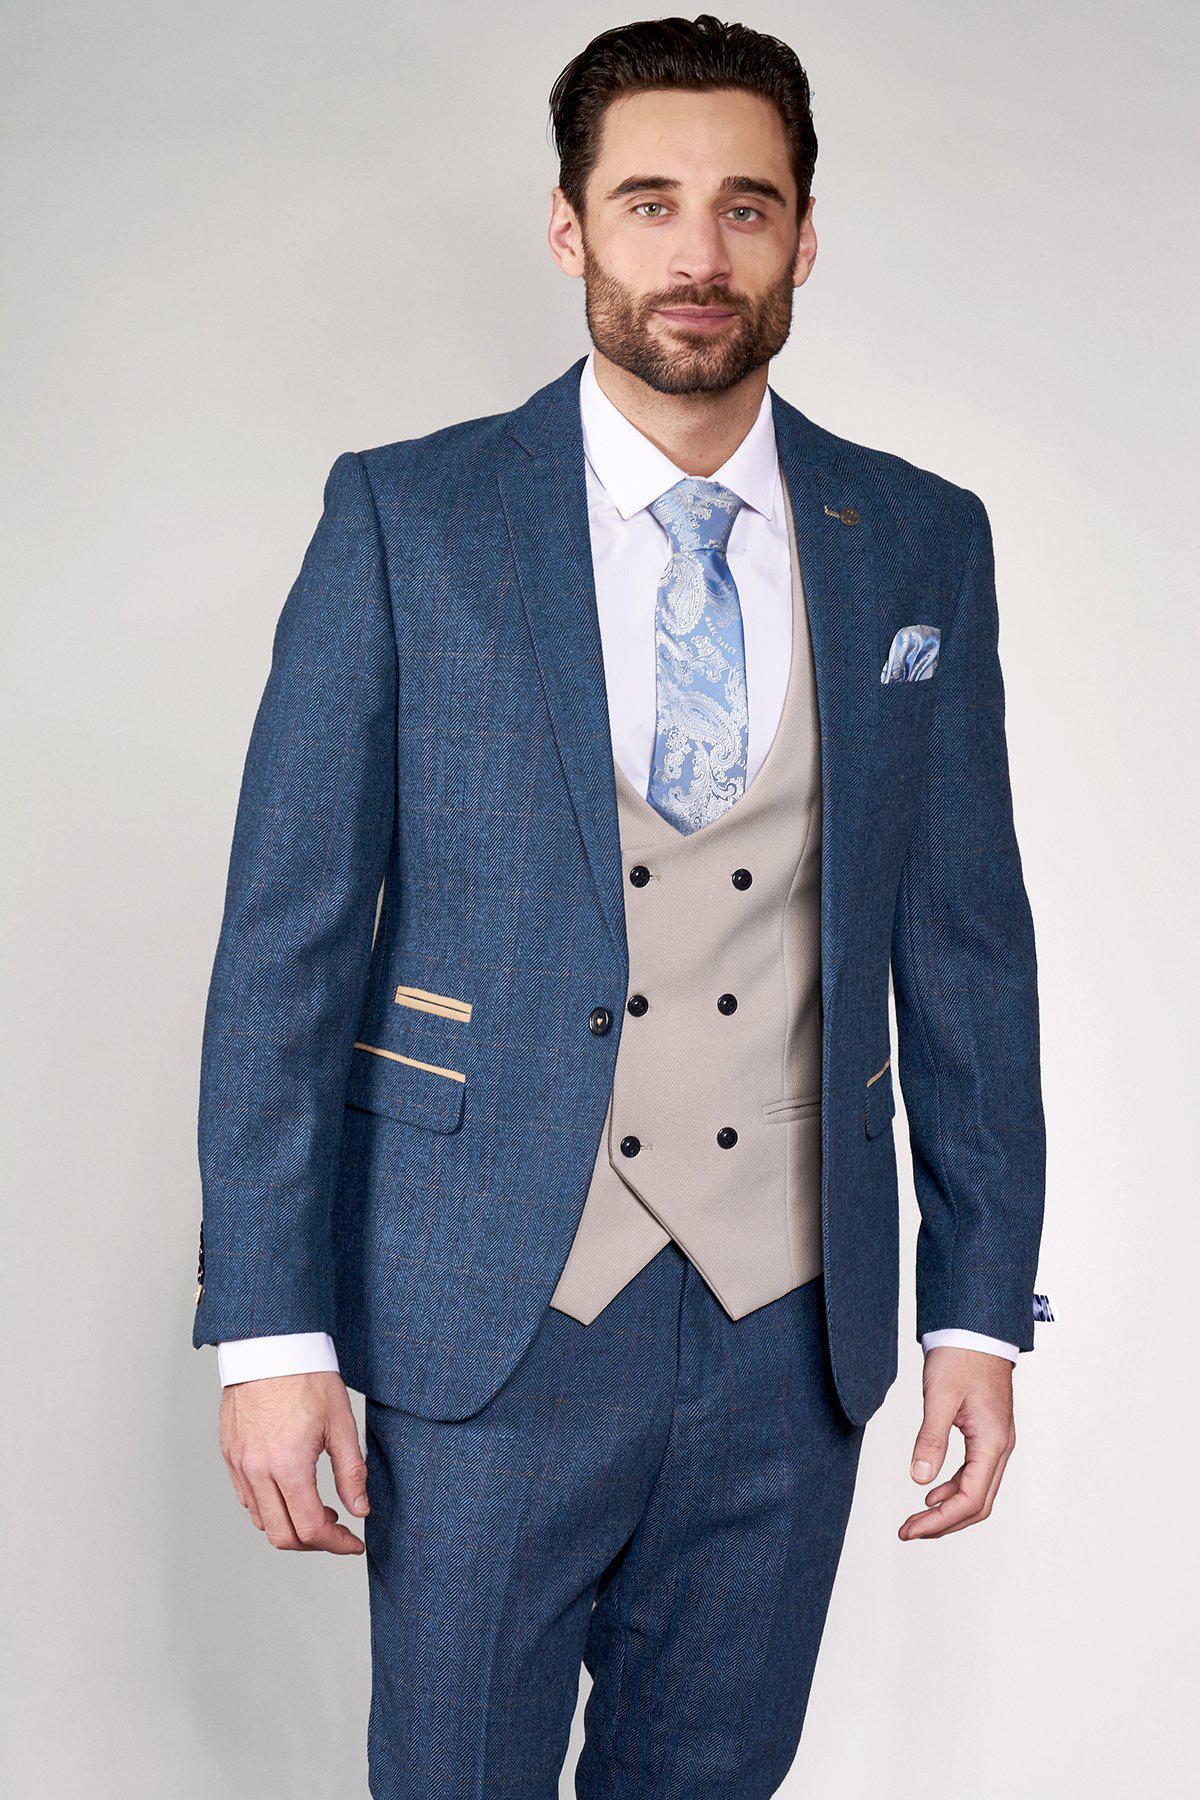 DION - Blue Tweed Check Suit With Stone Waistcoat – Marc Darcy